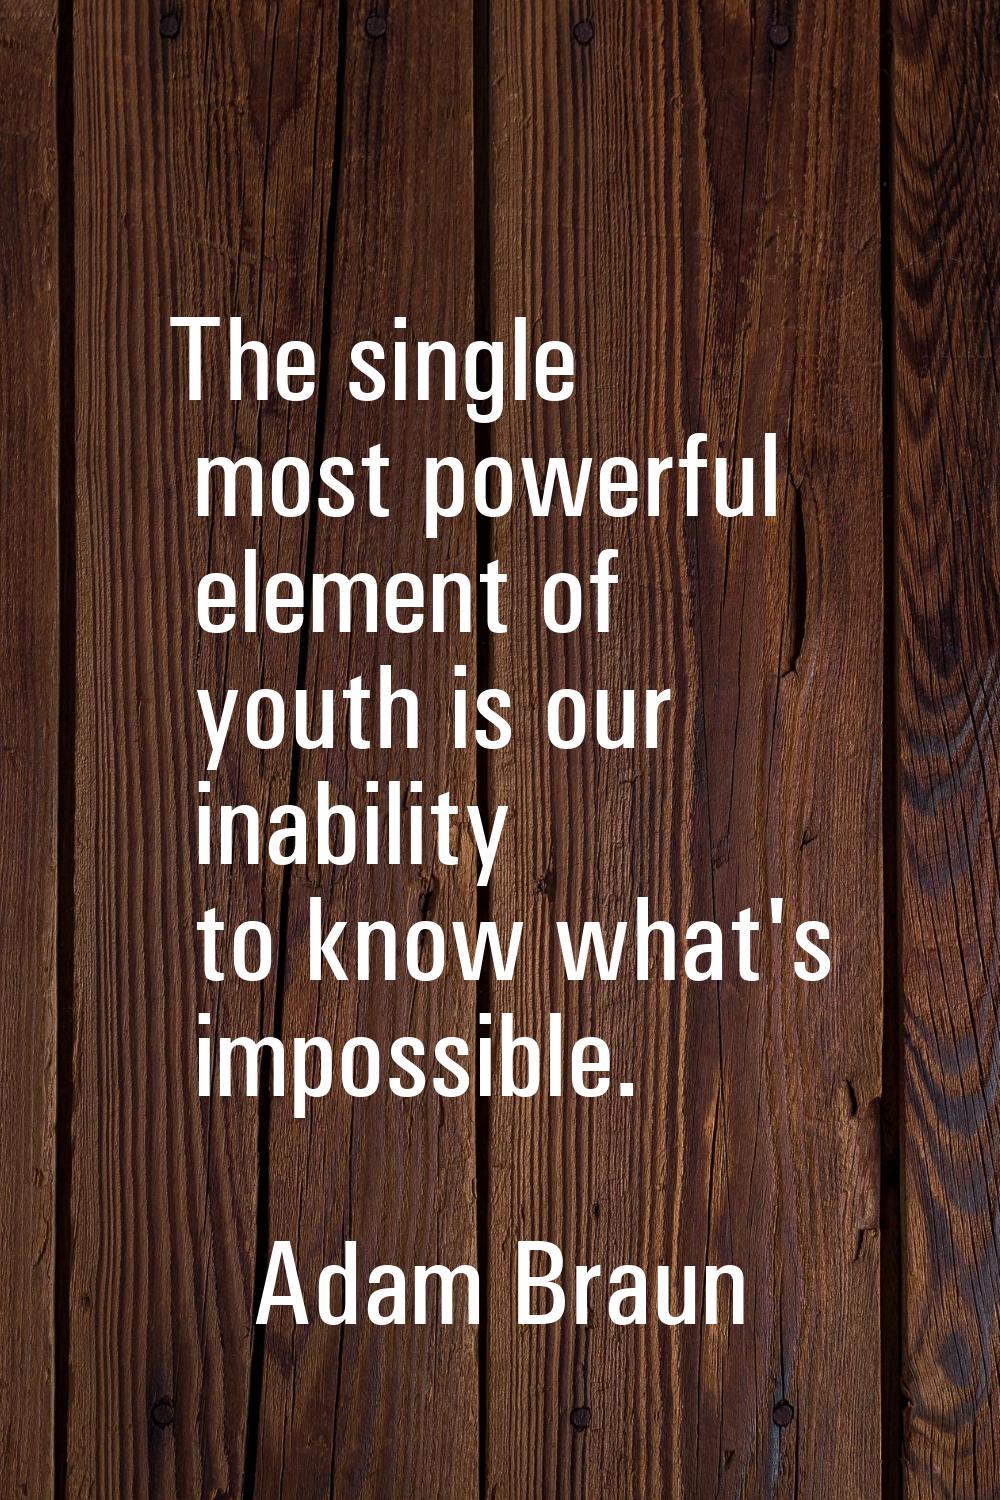 The single most powerful element of youth is our inability to know what's impossible.